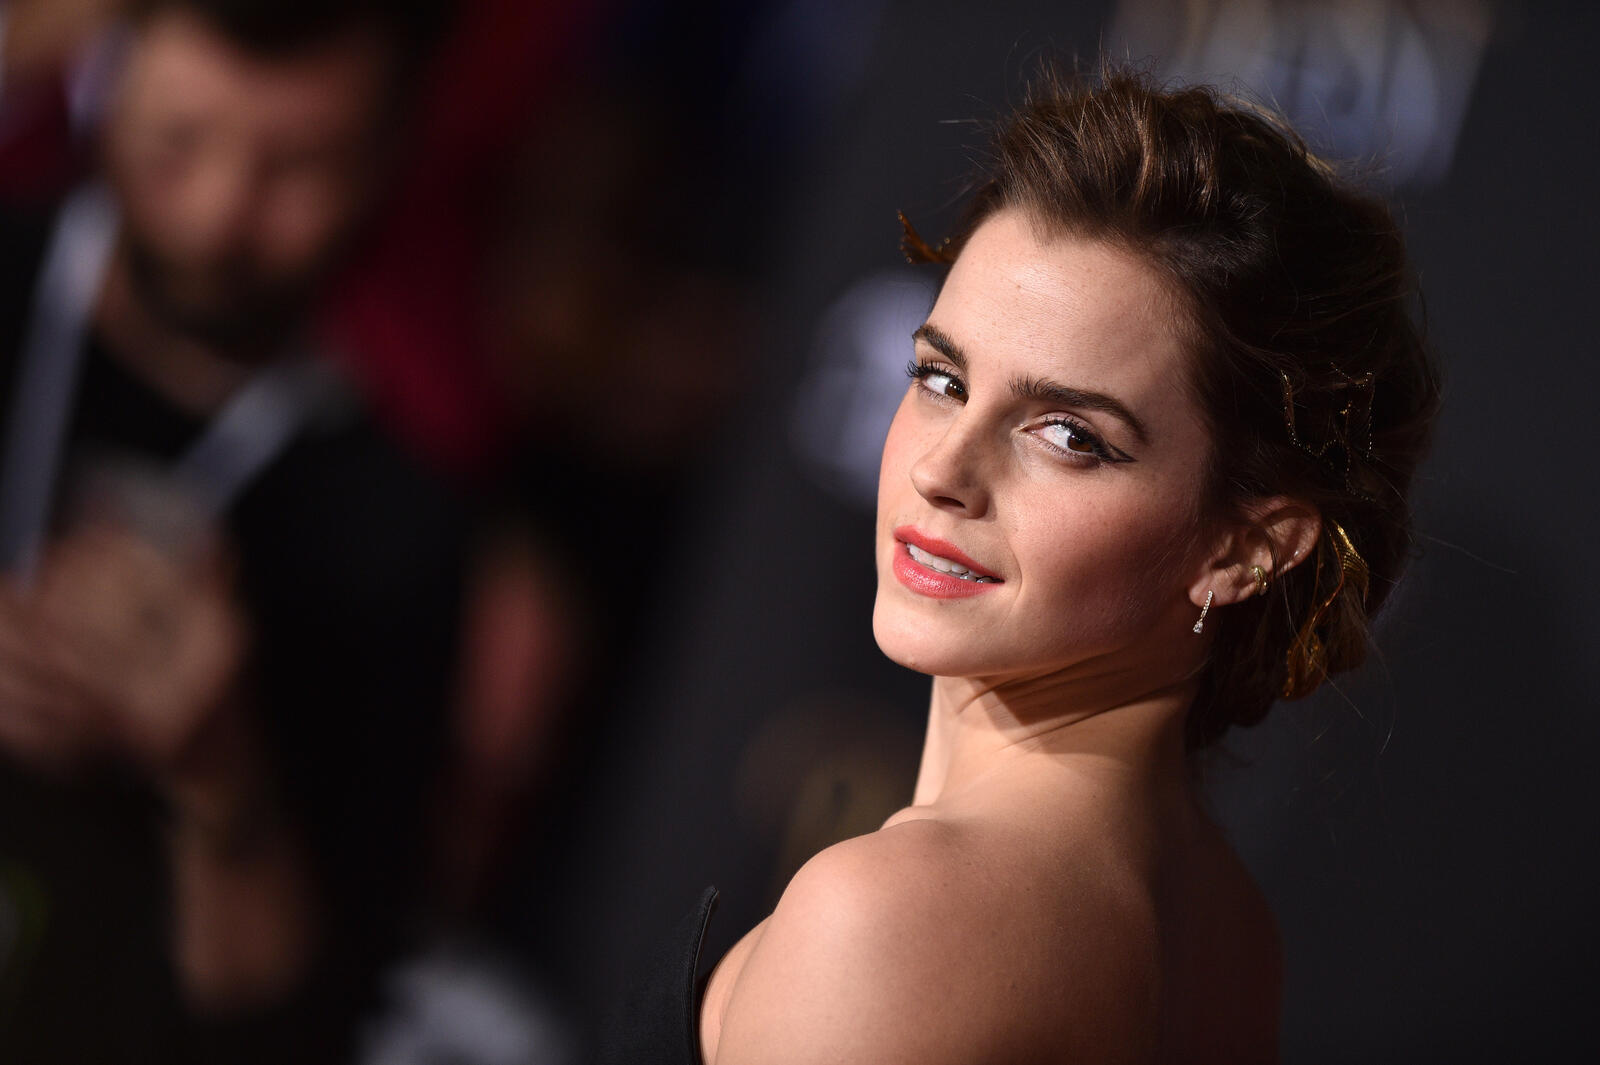 Free photo Emma Watson looked back at the photographer